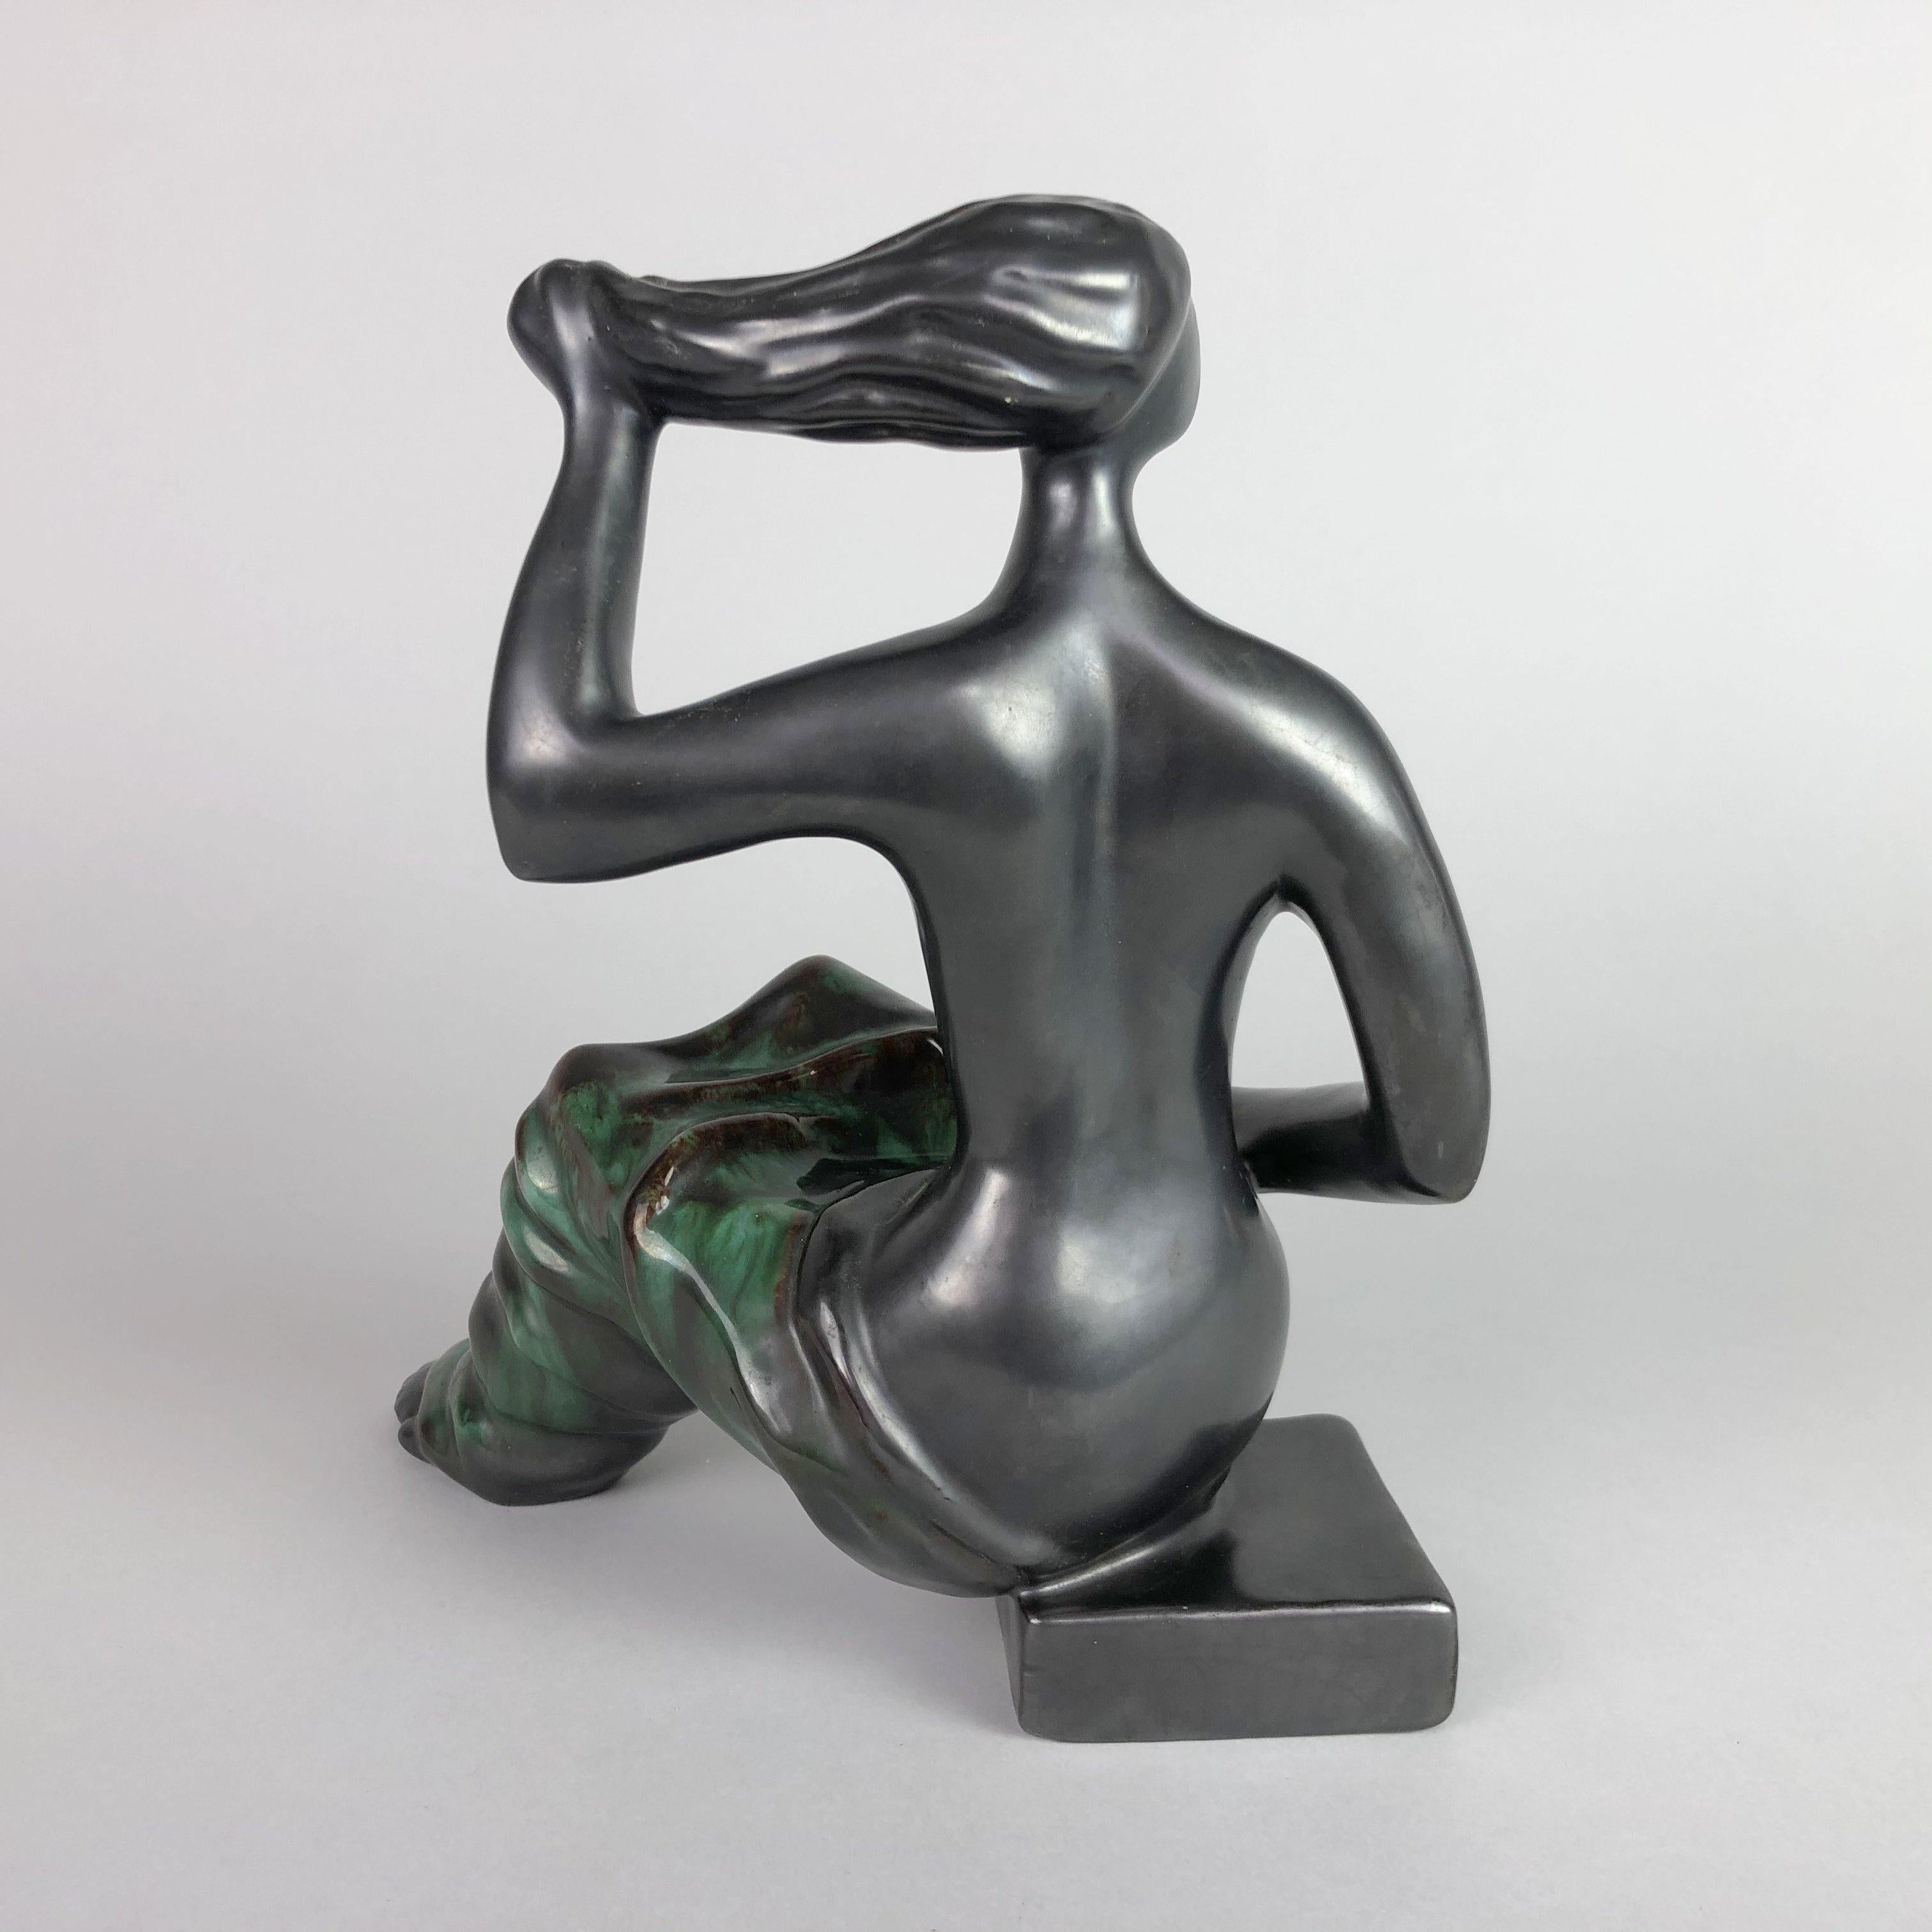 Mid-Century Modern Midcentury Ceramic Sculpture by Jitka Forejtova for Keramos, 1960s For Sale